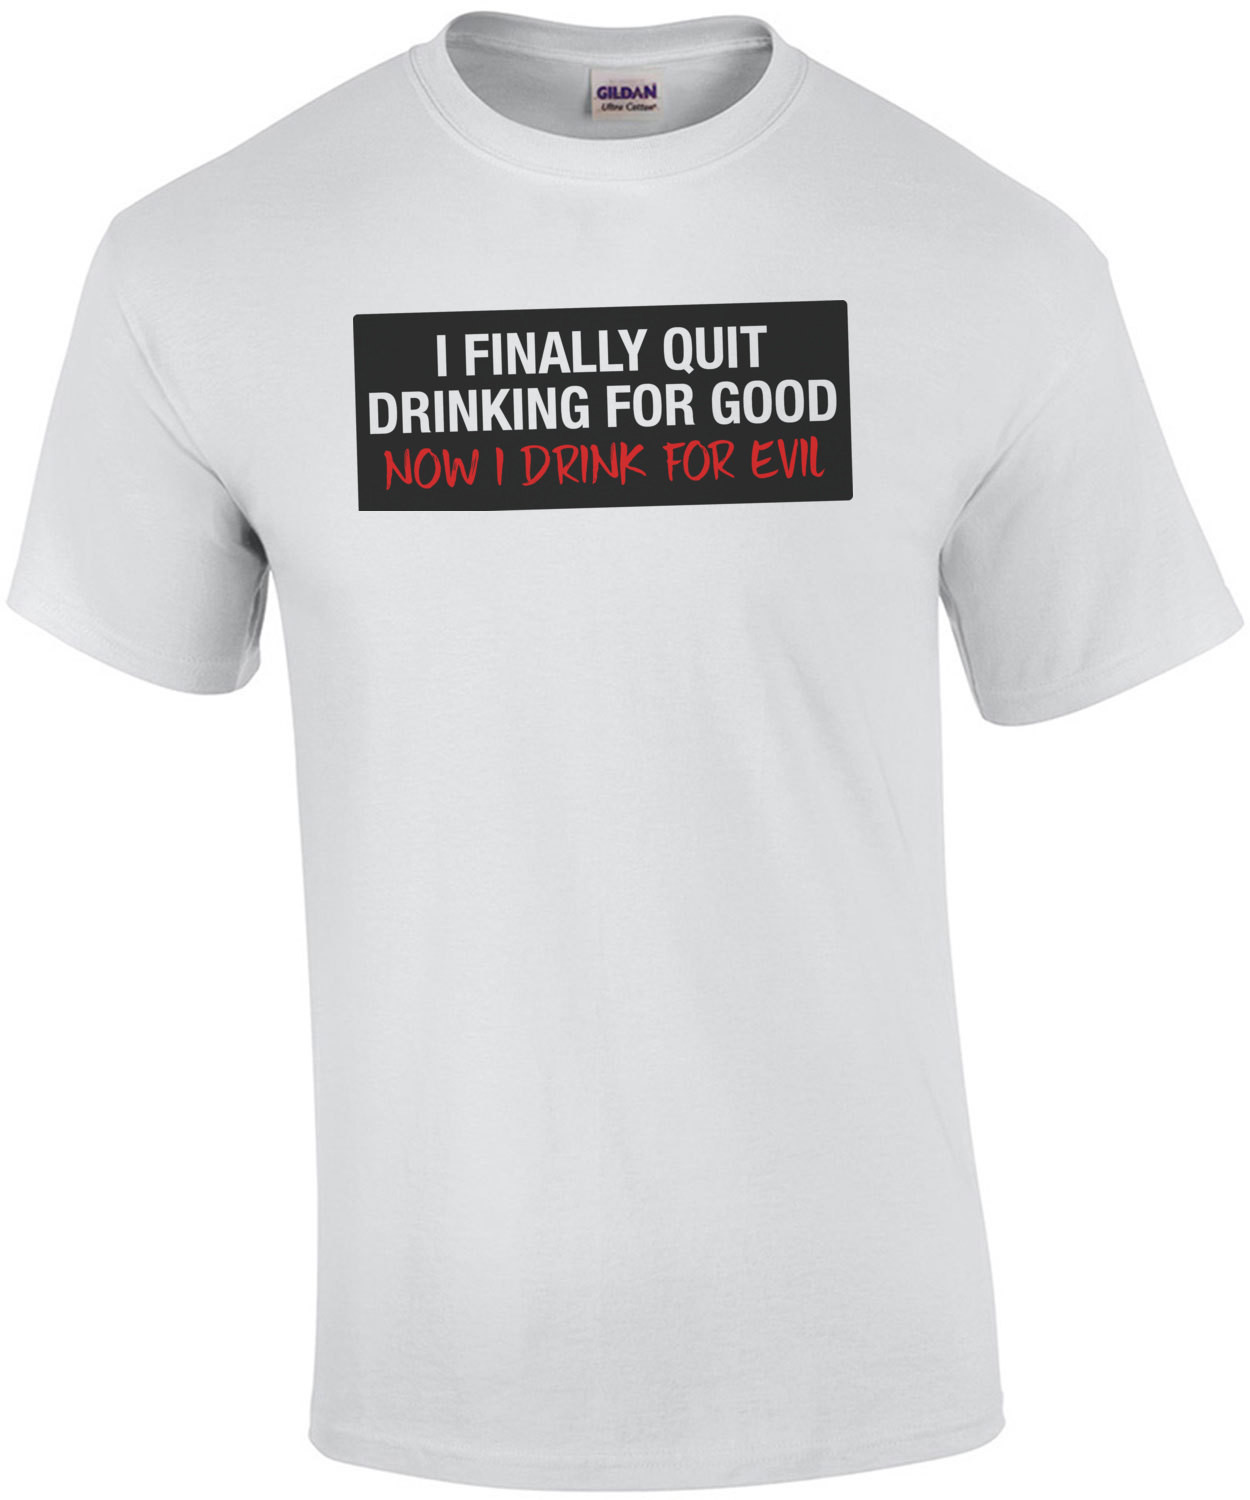 I Finally Quit Drinking For Good Now I Drink For Evil T-Shirt